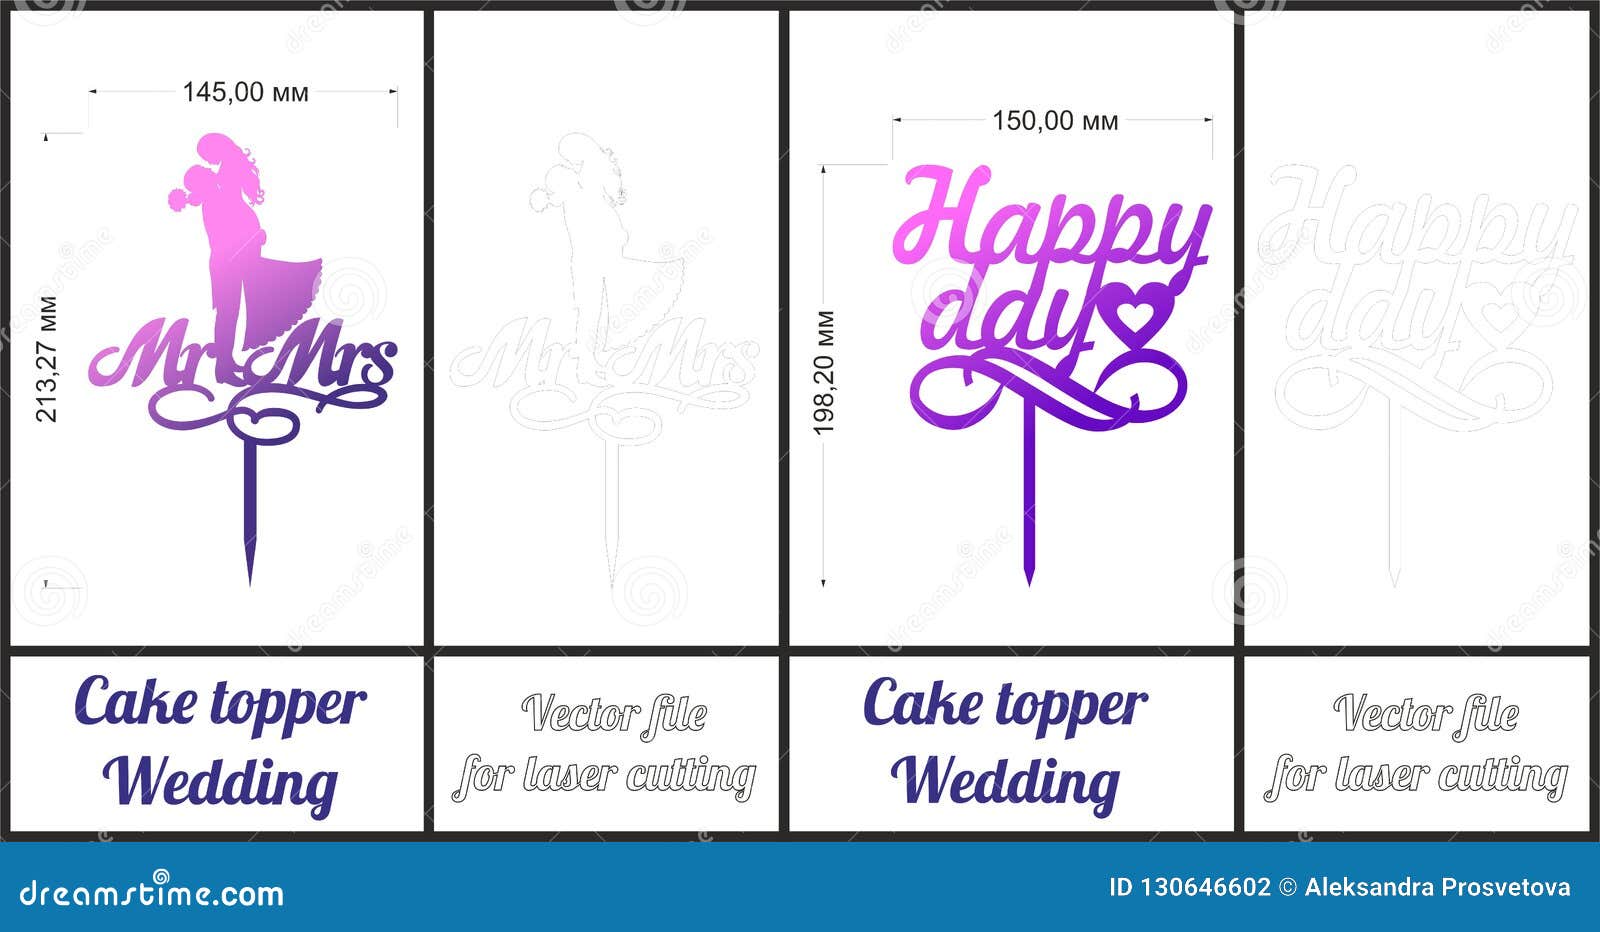 Download The Wedding Cake. Cake Topper. Vector For Laser Stock ...